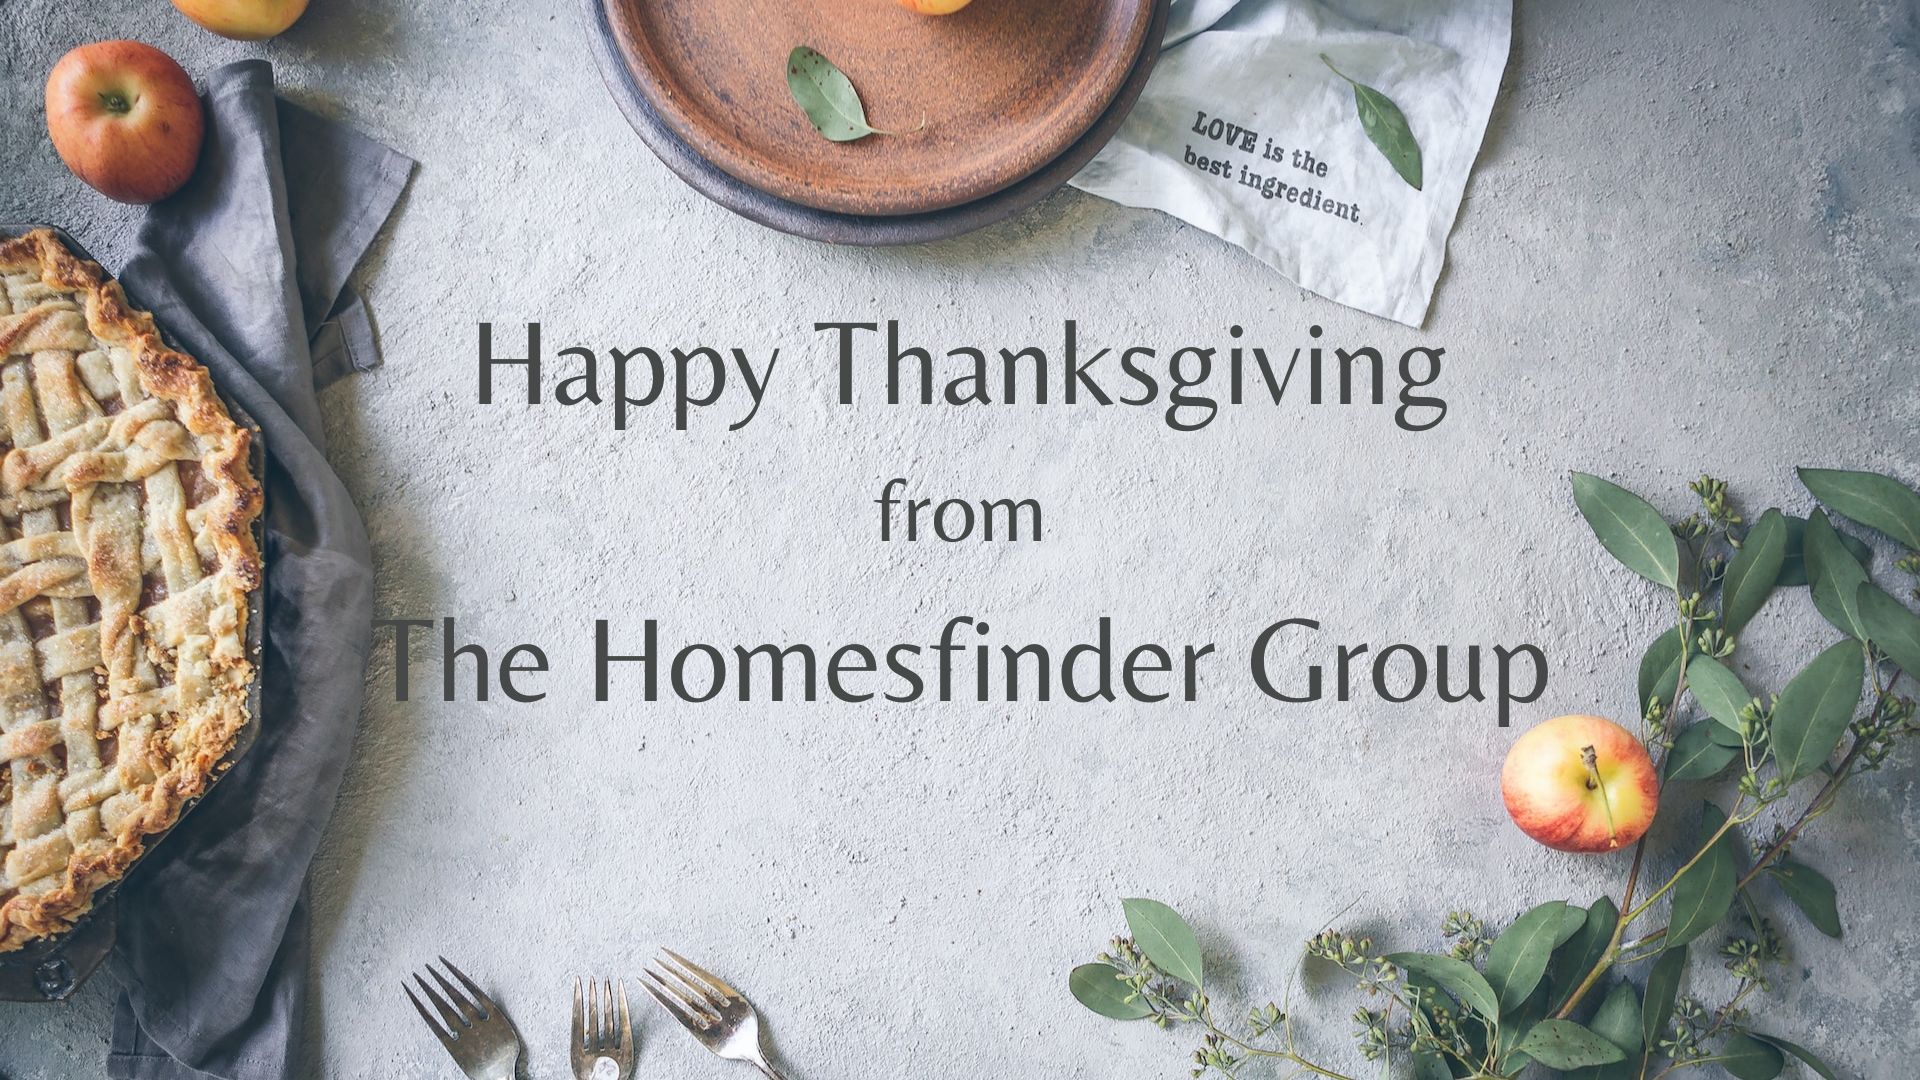 Happy Thanksgiving from The Homesfinder Group.jpg